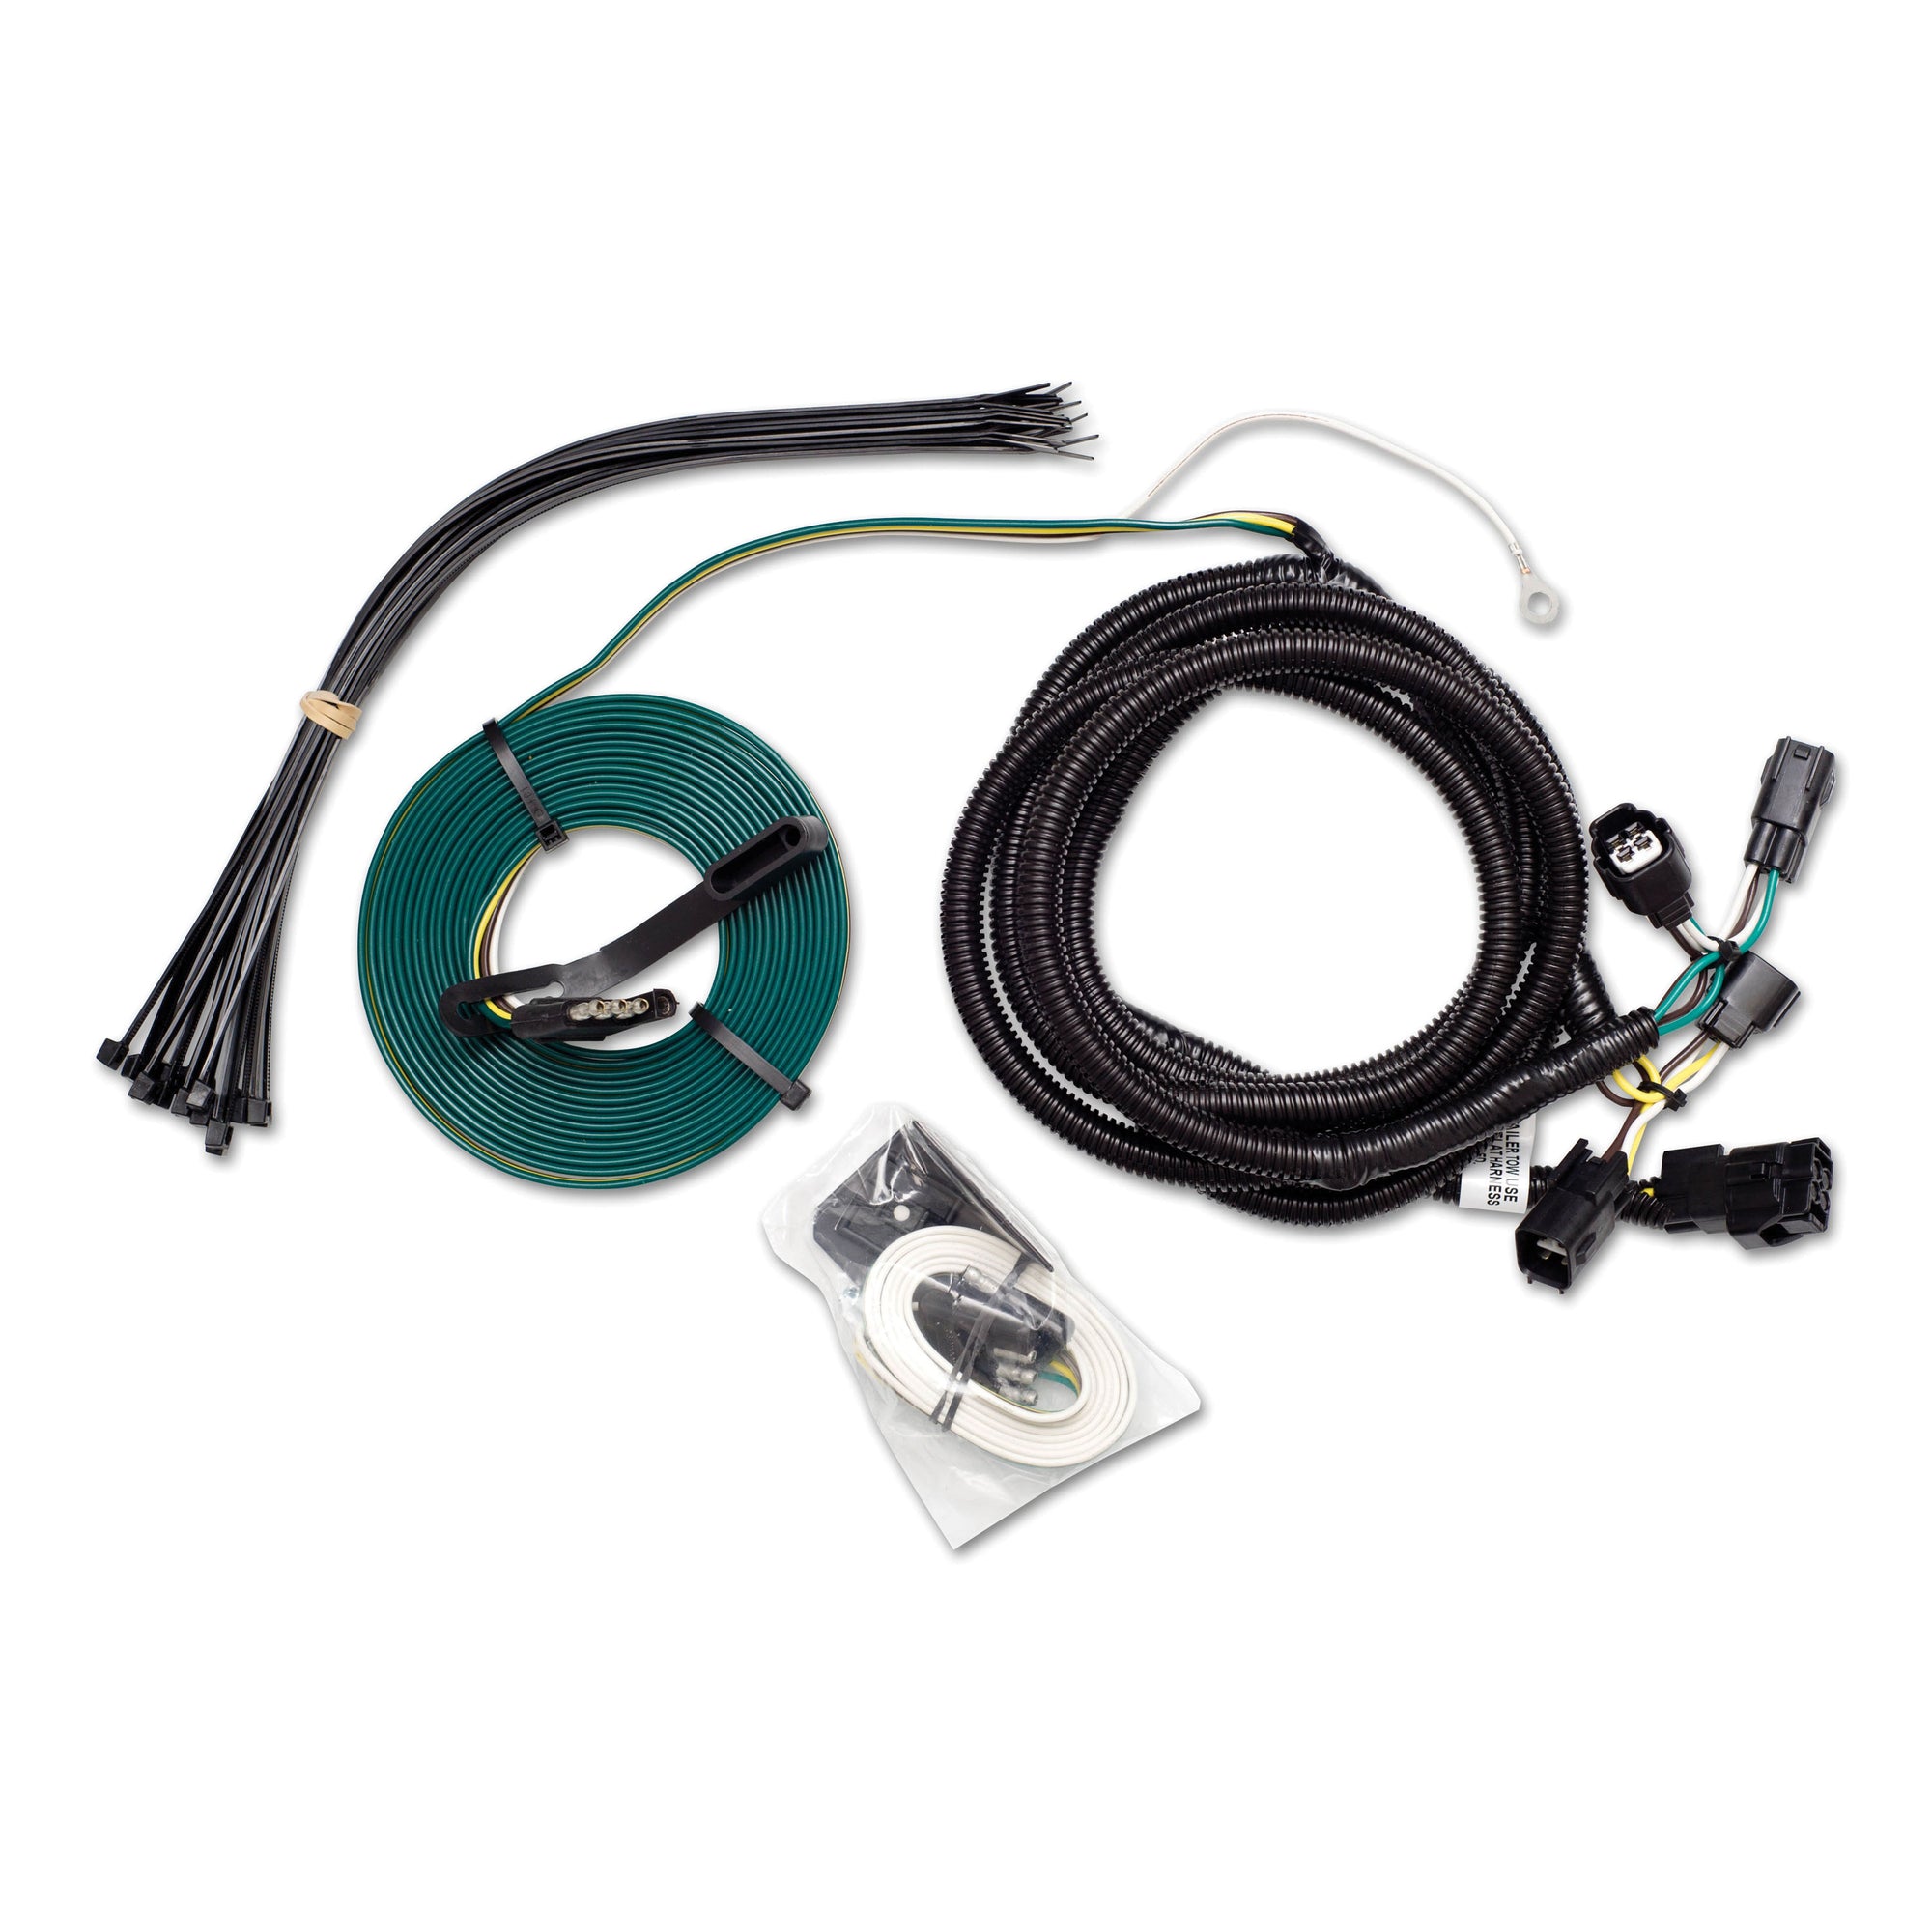 Demco 9523106 Towed Connector Vehicle Wiring Kit - For Chevrolet Cruze '11-'13